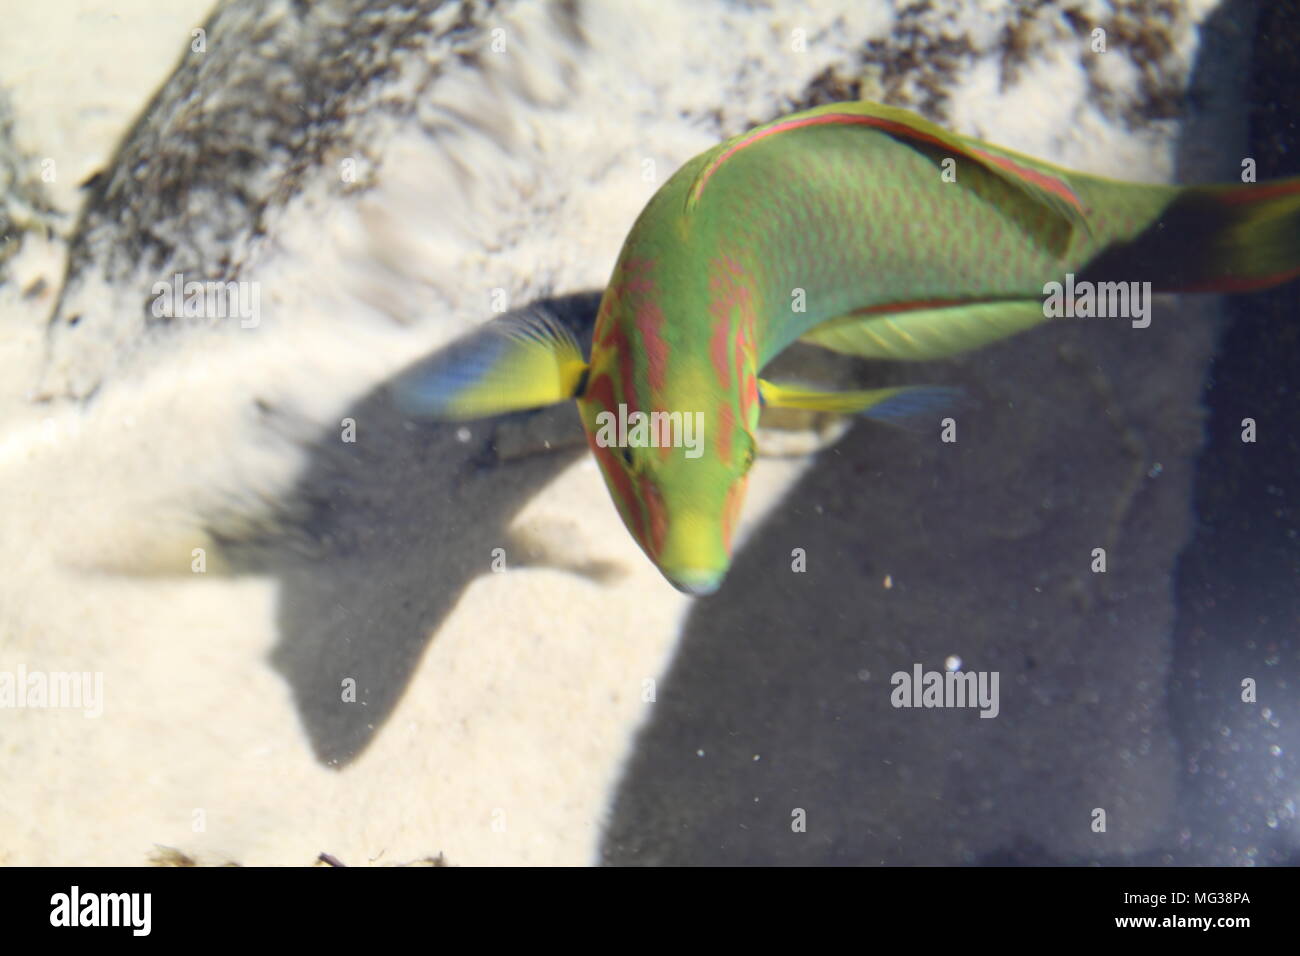 Juvenile Green Moon Wrasse in Rockpool (Thalassoma Lutescens) Stock Photo